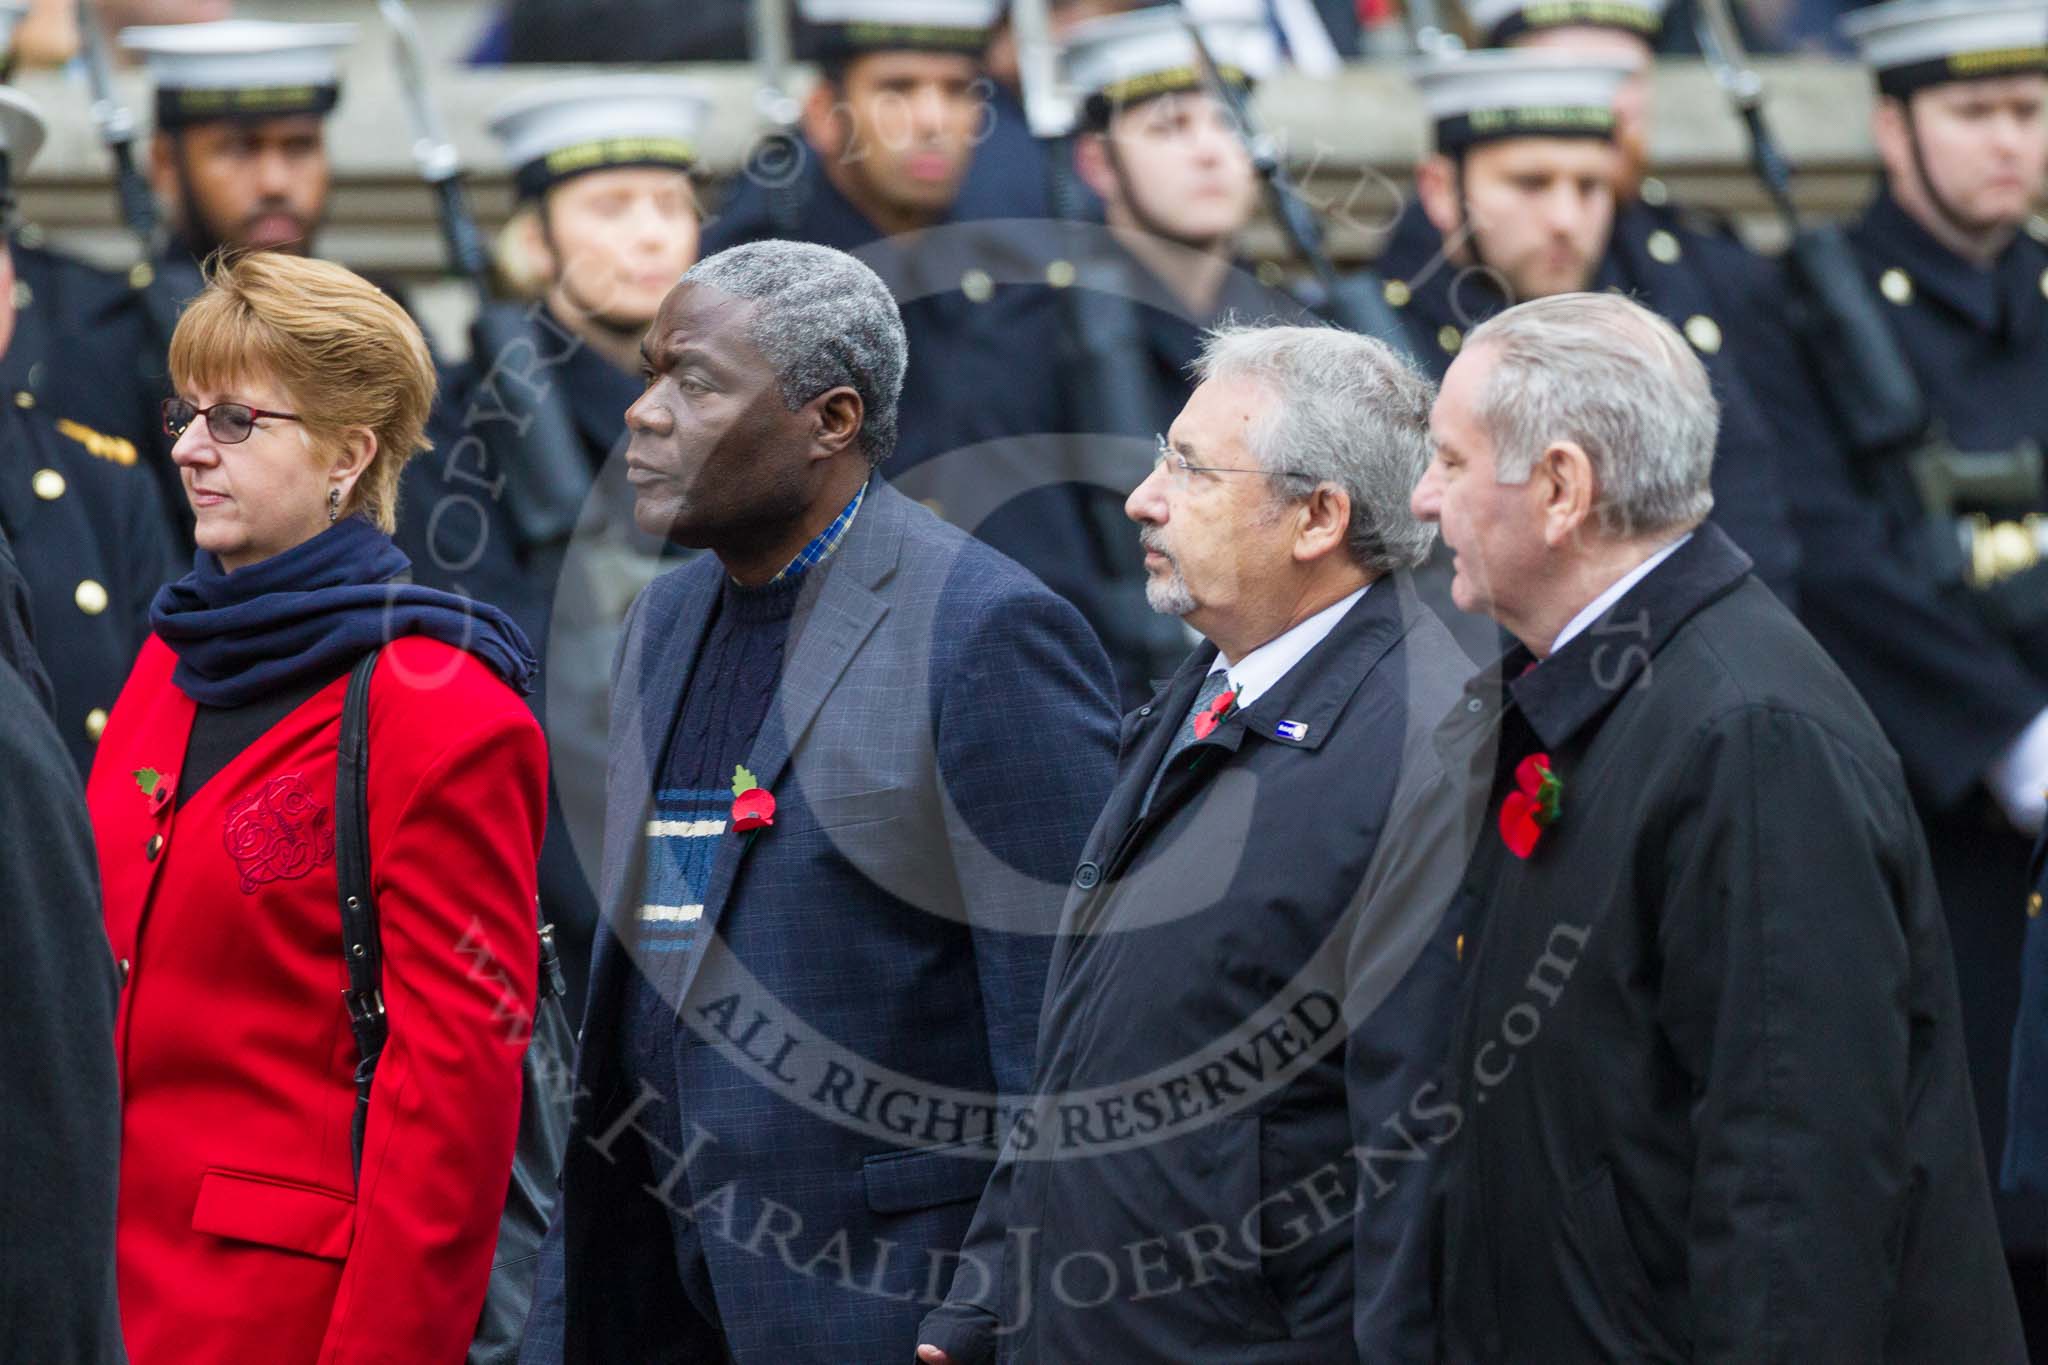 Remembrance Sunday at the Cenotaph 2015: Group M42, Rotary International.
Cenotaph, Whitehall, London SW1,
London,
Greater London,
United Kingdom,
on 08 November 2015 at 12:19, image #1682